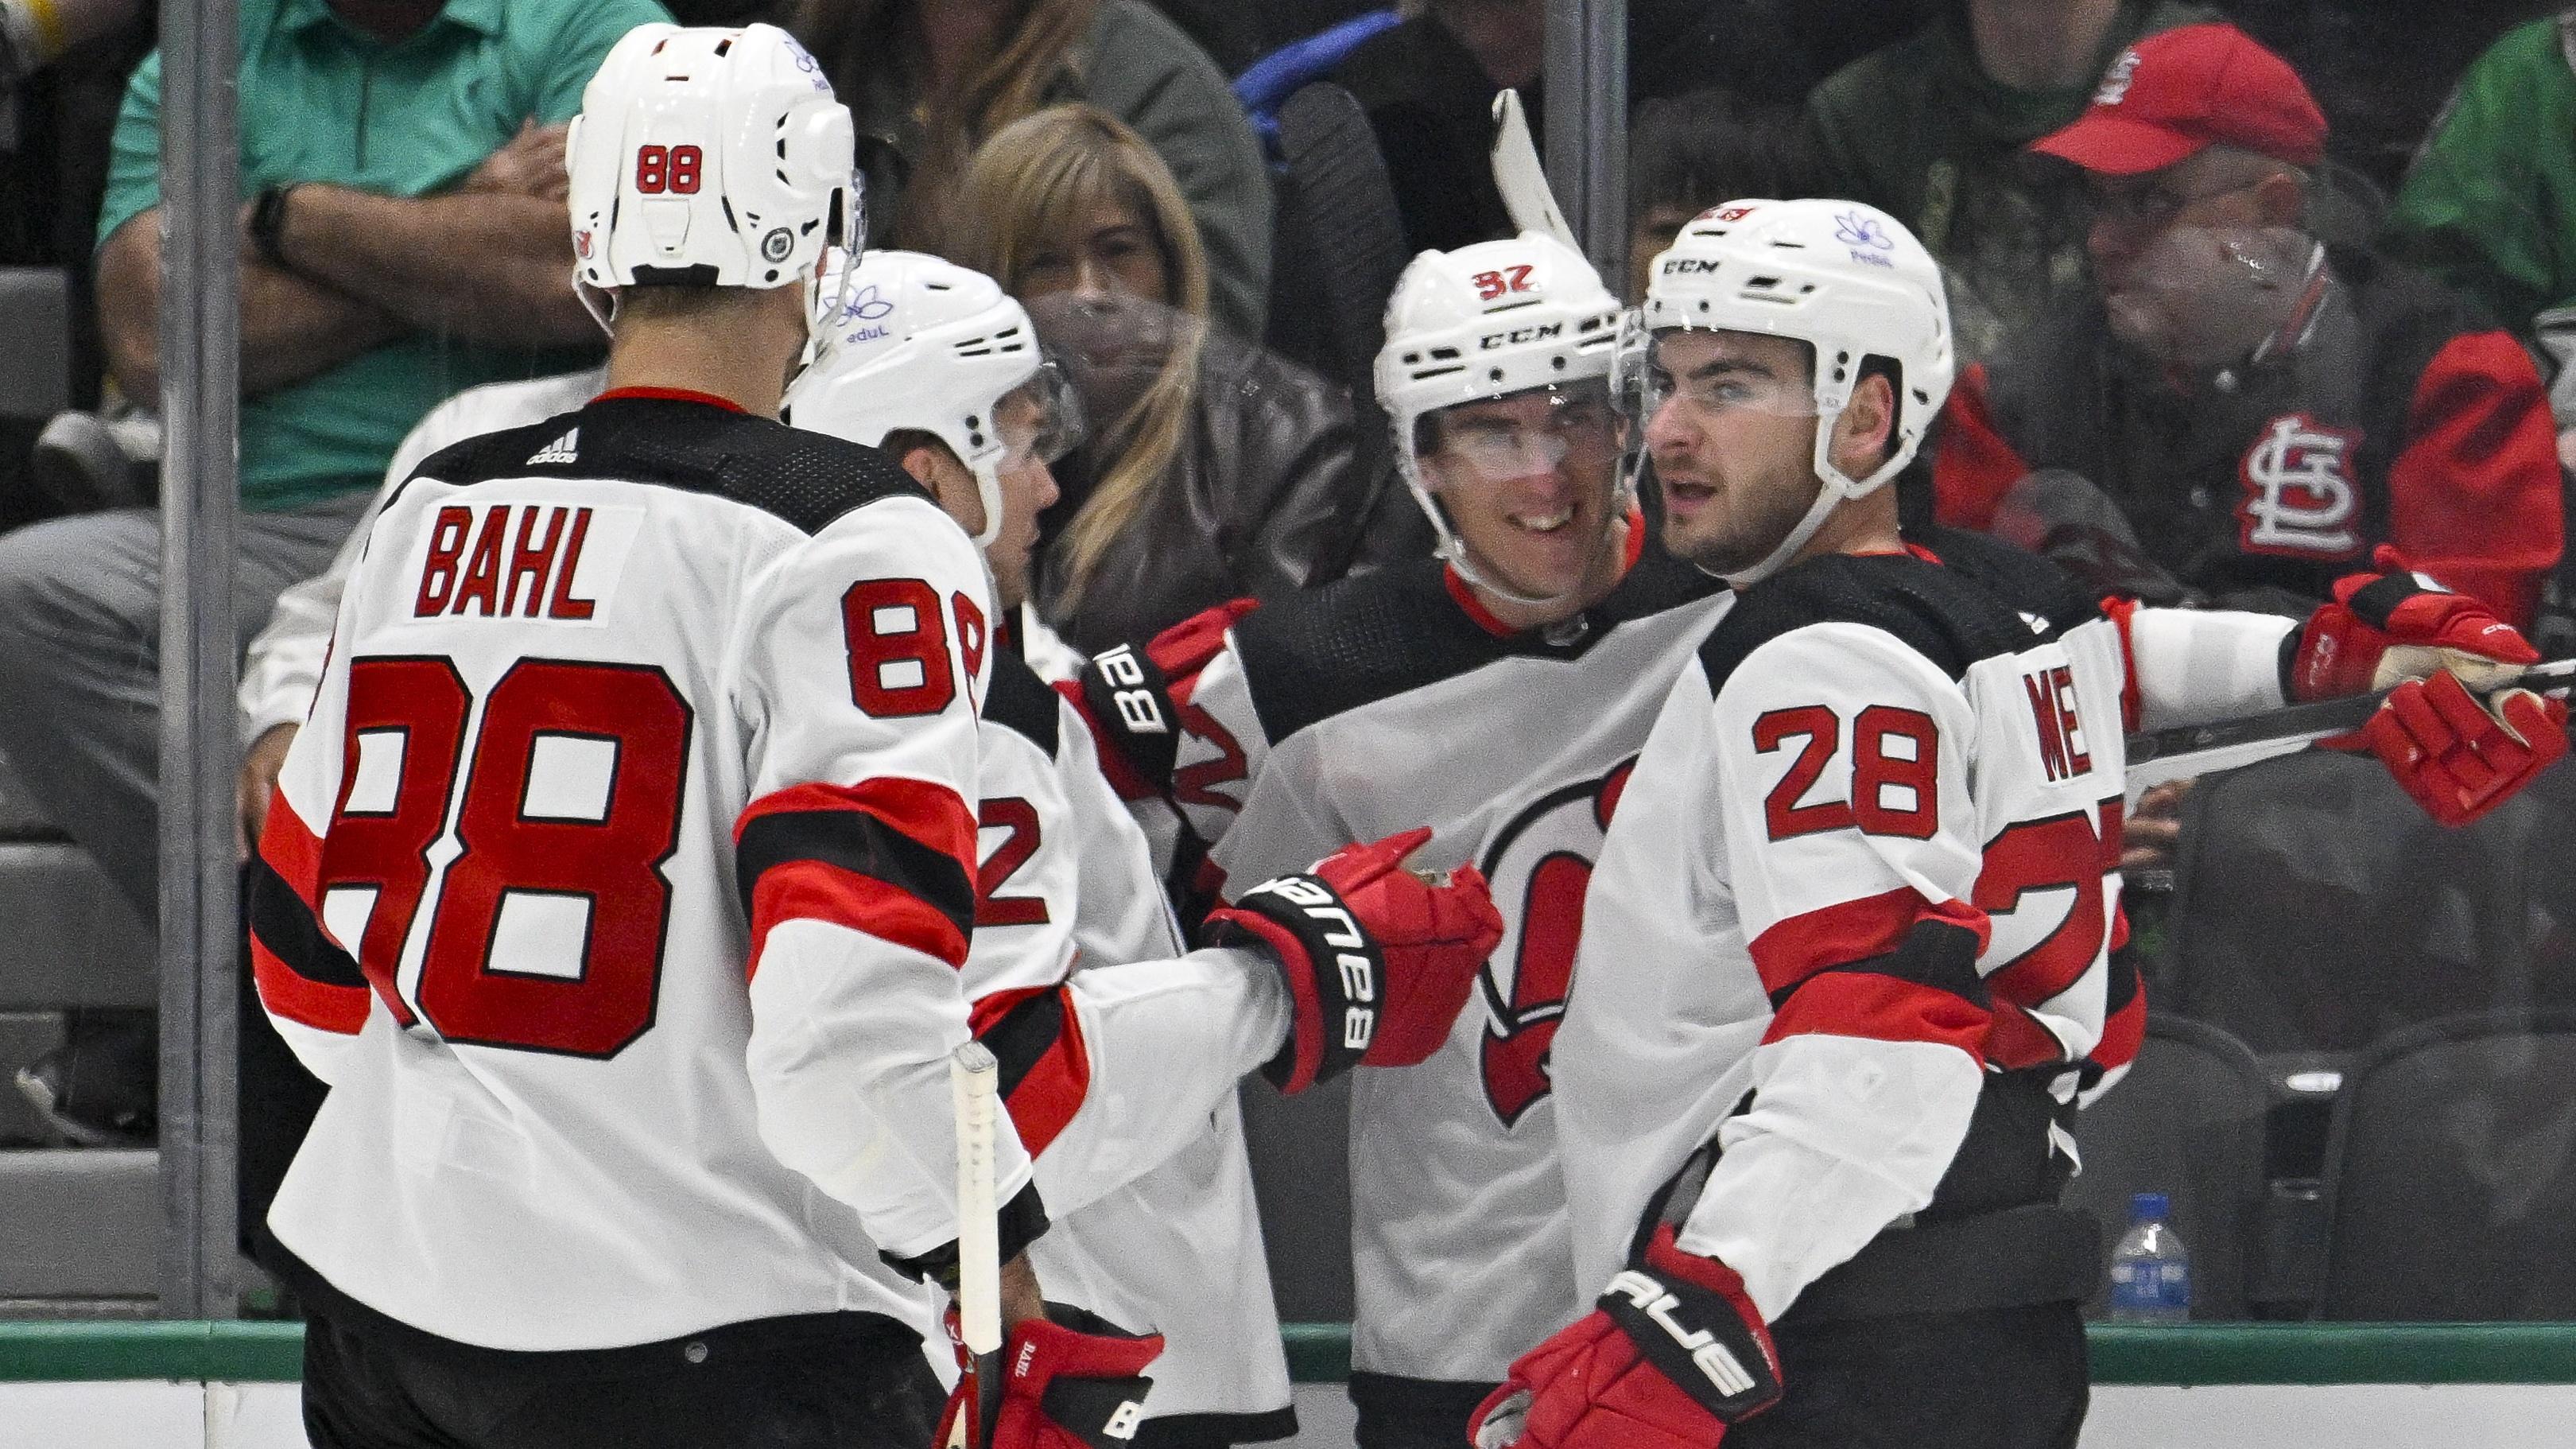 New Jersey Devils defenseman Kevin Bahl (88) and center Curtis Lazar (42) and right wing Timo Meier (28) celebrates a goal scored by Meier against the Dallas Stars during the second period at the American Airlines Center / Jerome Miron - USA TODAY Sports